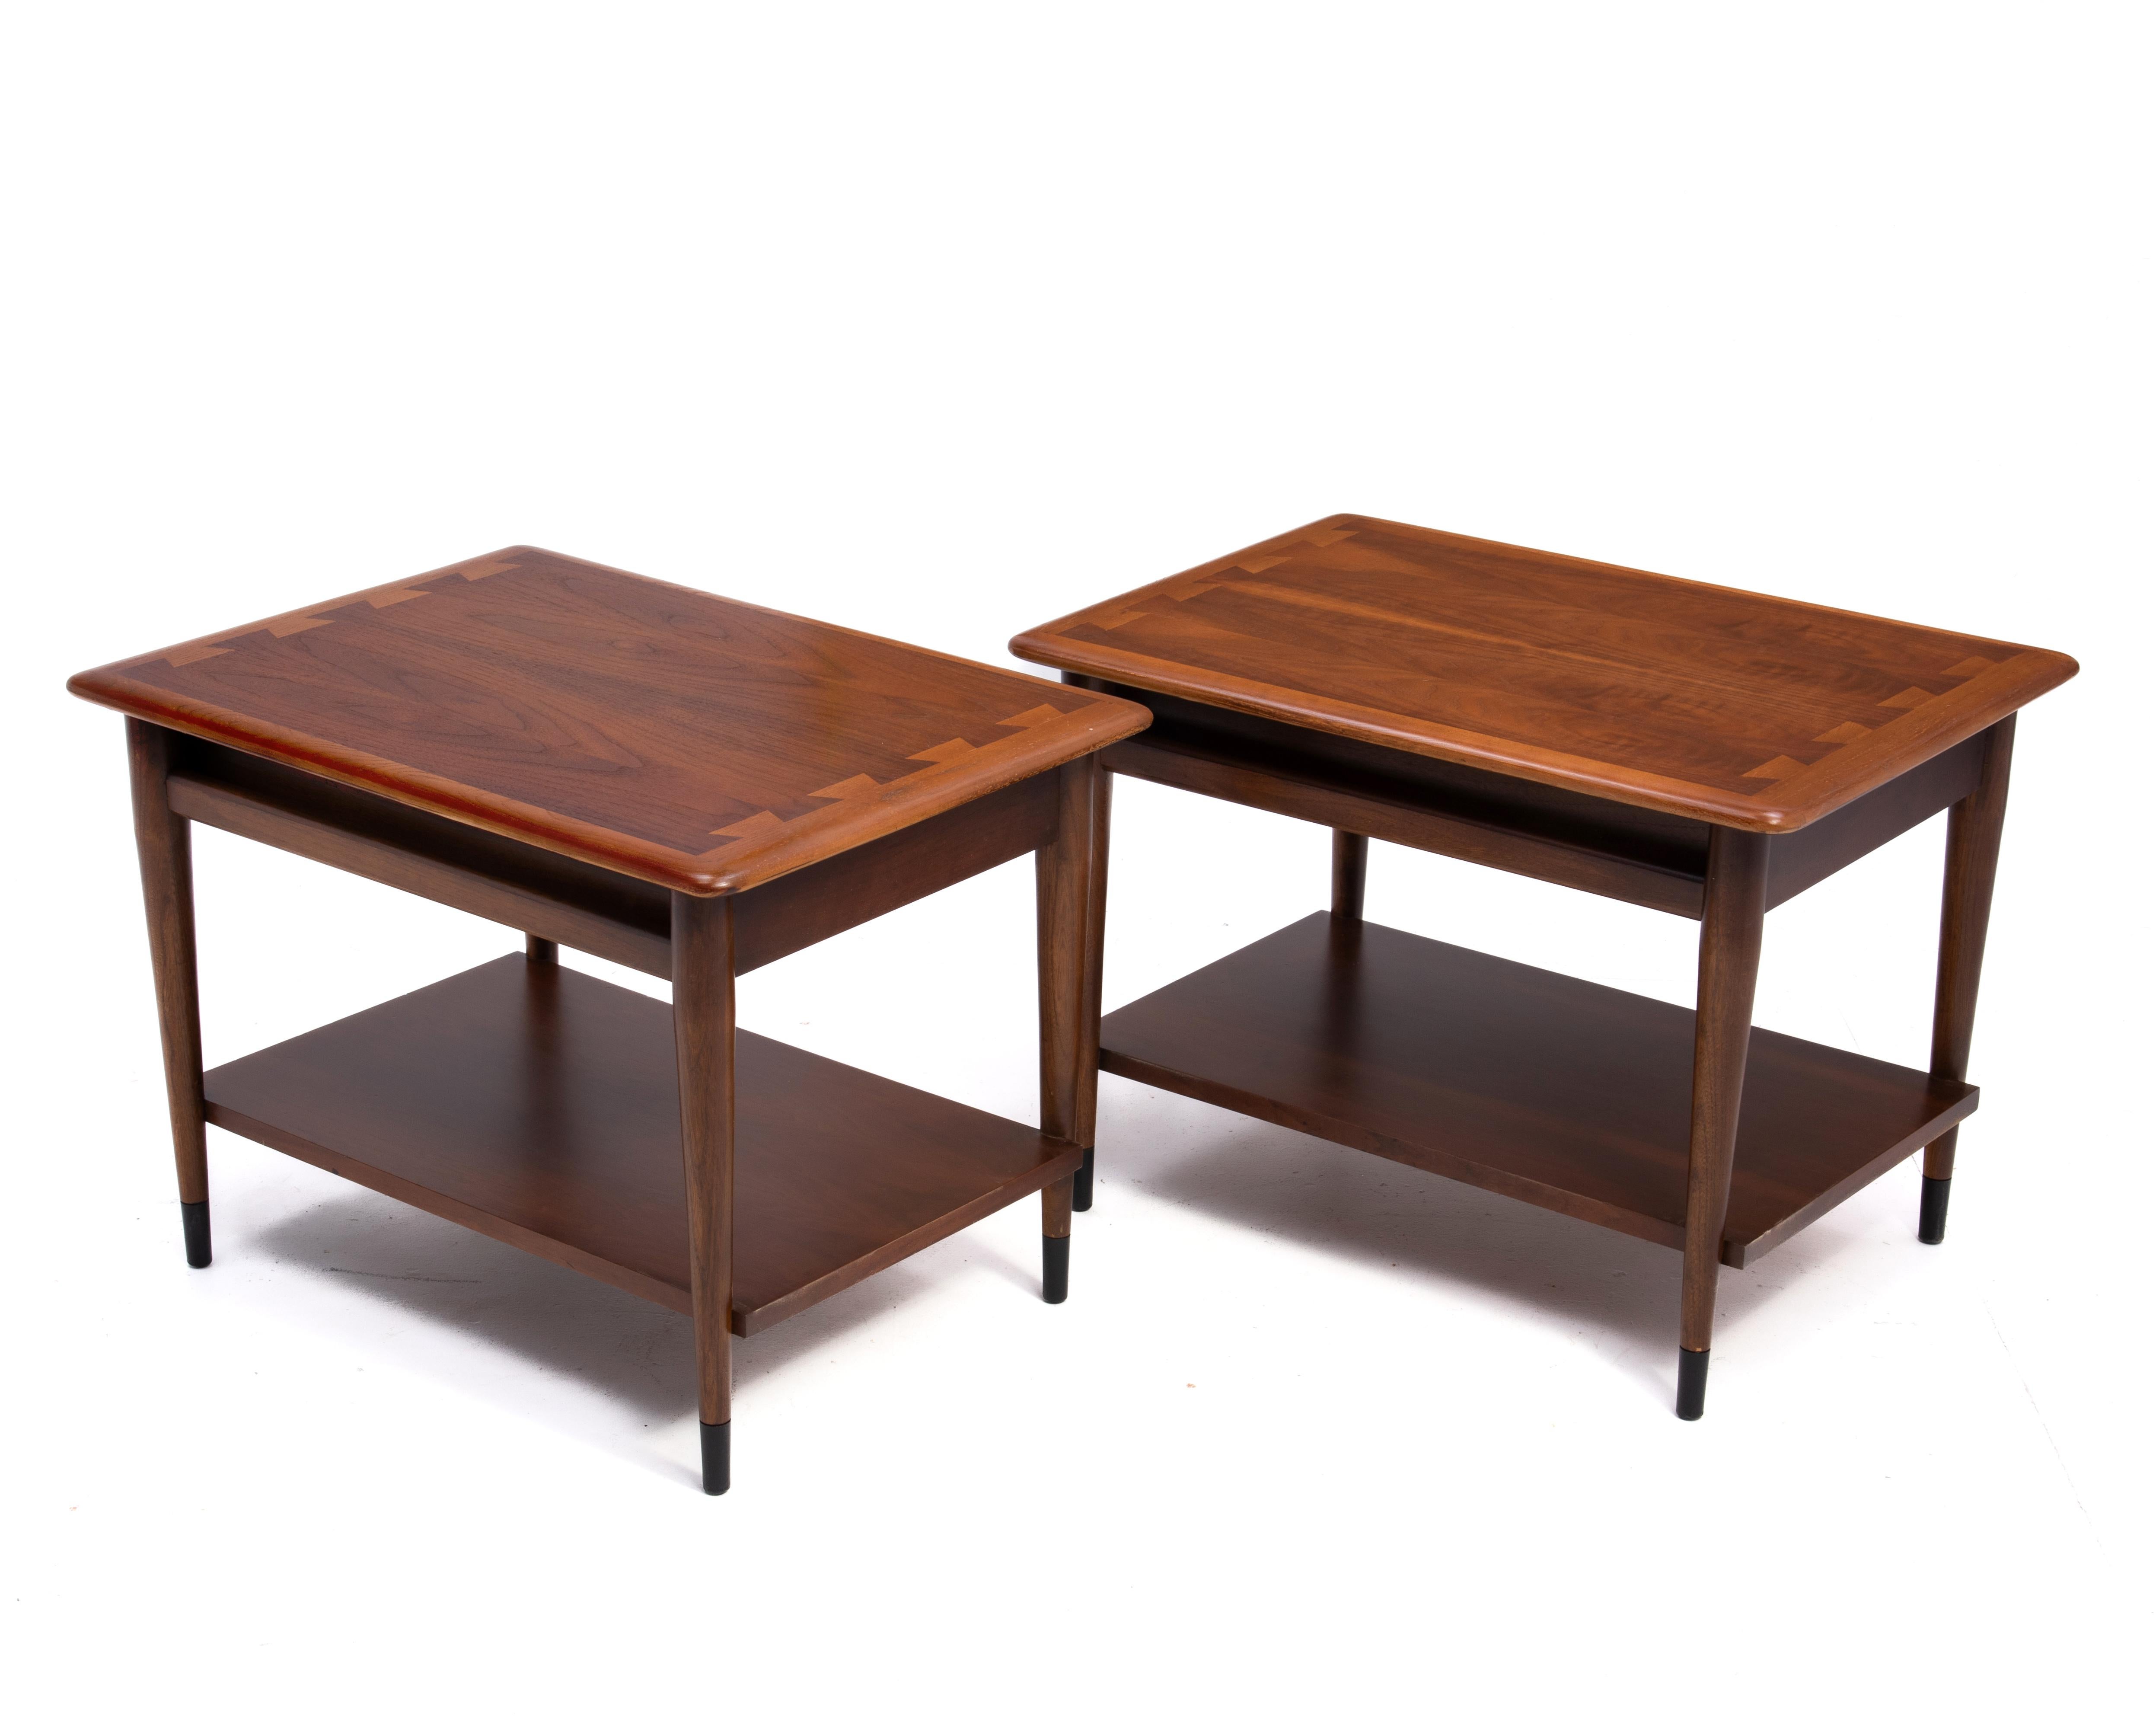 A pair of Acclaim end tables with a single drawer, designed by Andre Bus for Lane Furniture in Altavista Virginia. Iconic and well made, this pair of tables feature wonderful book matched walnut tops.